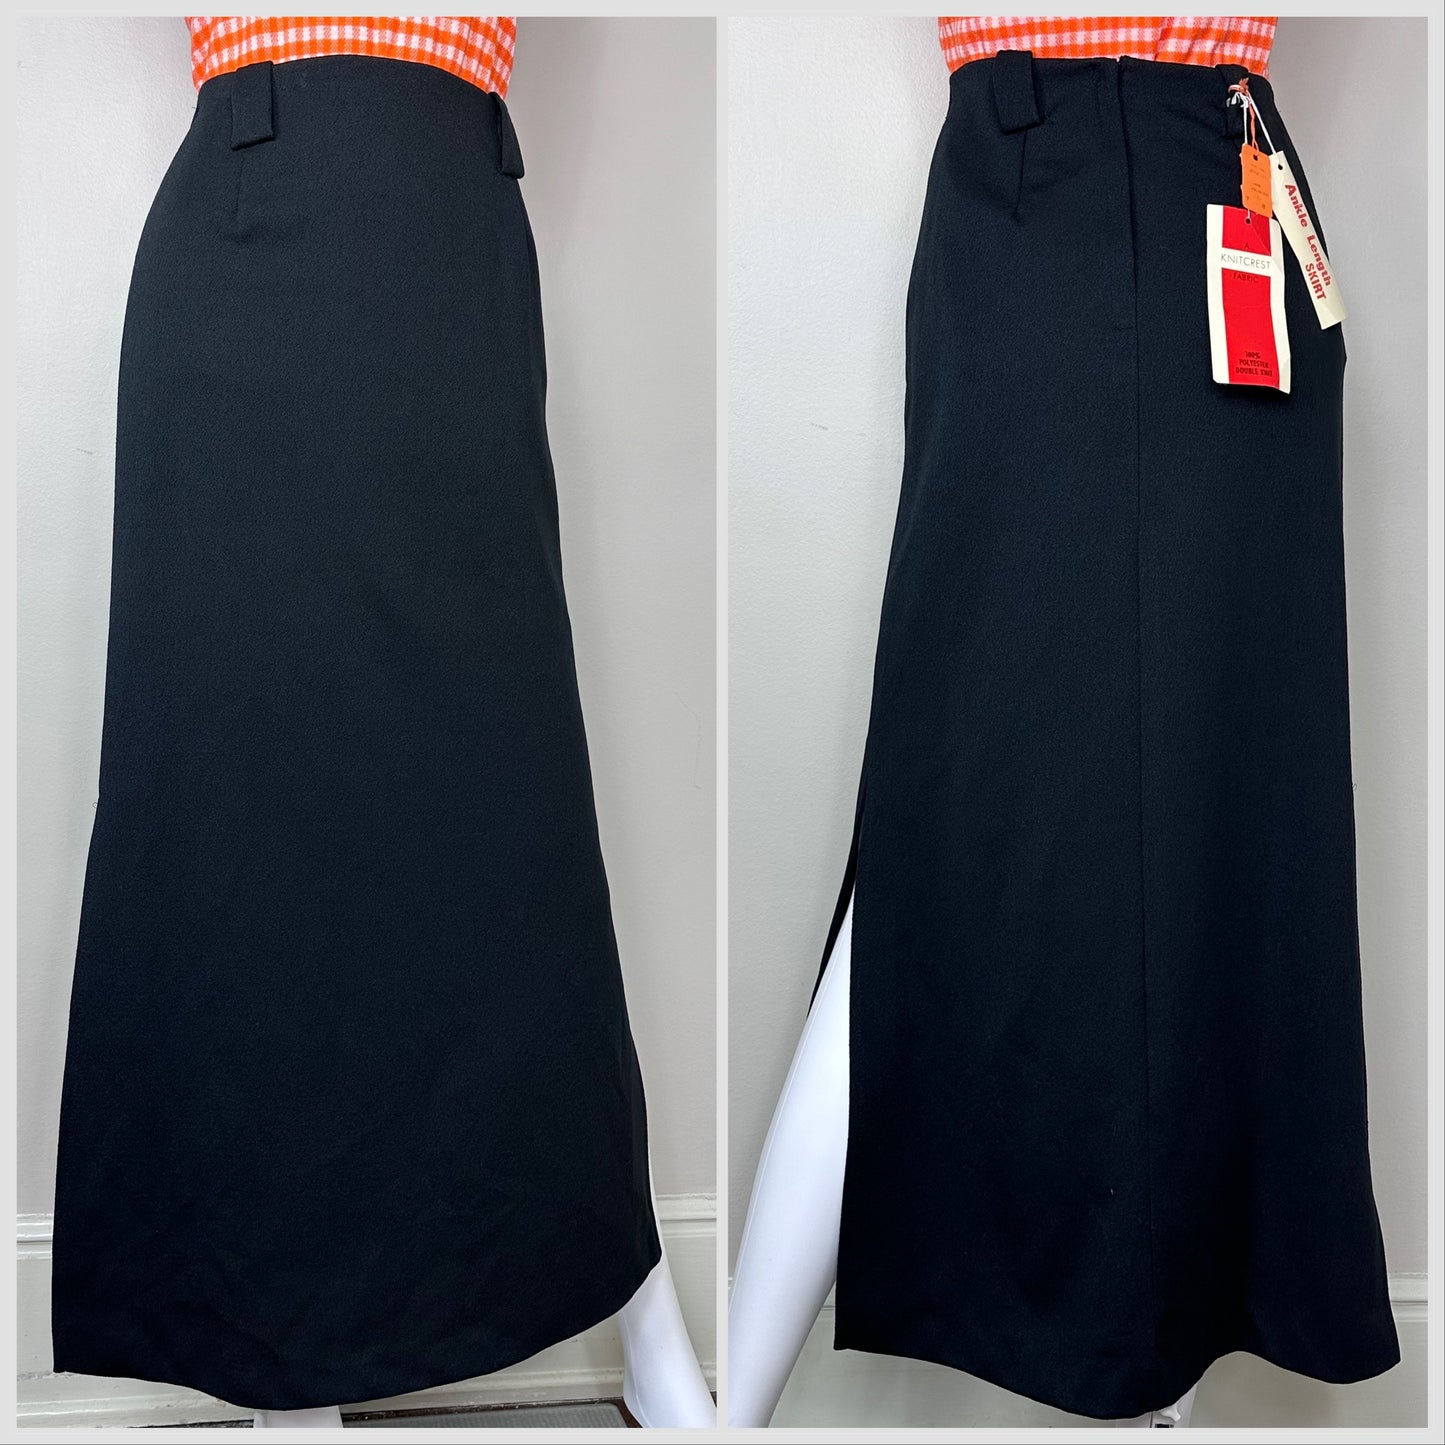 1970s Black Polyester Double Knit Maxi Skirt with High Slits, Knitcrest Size XXS, Deadstock with Tags